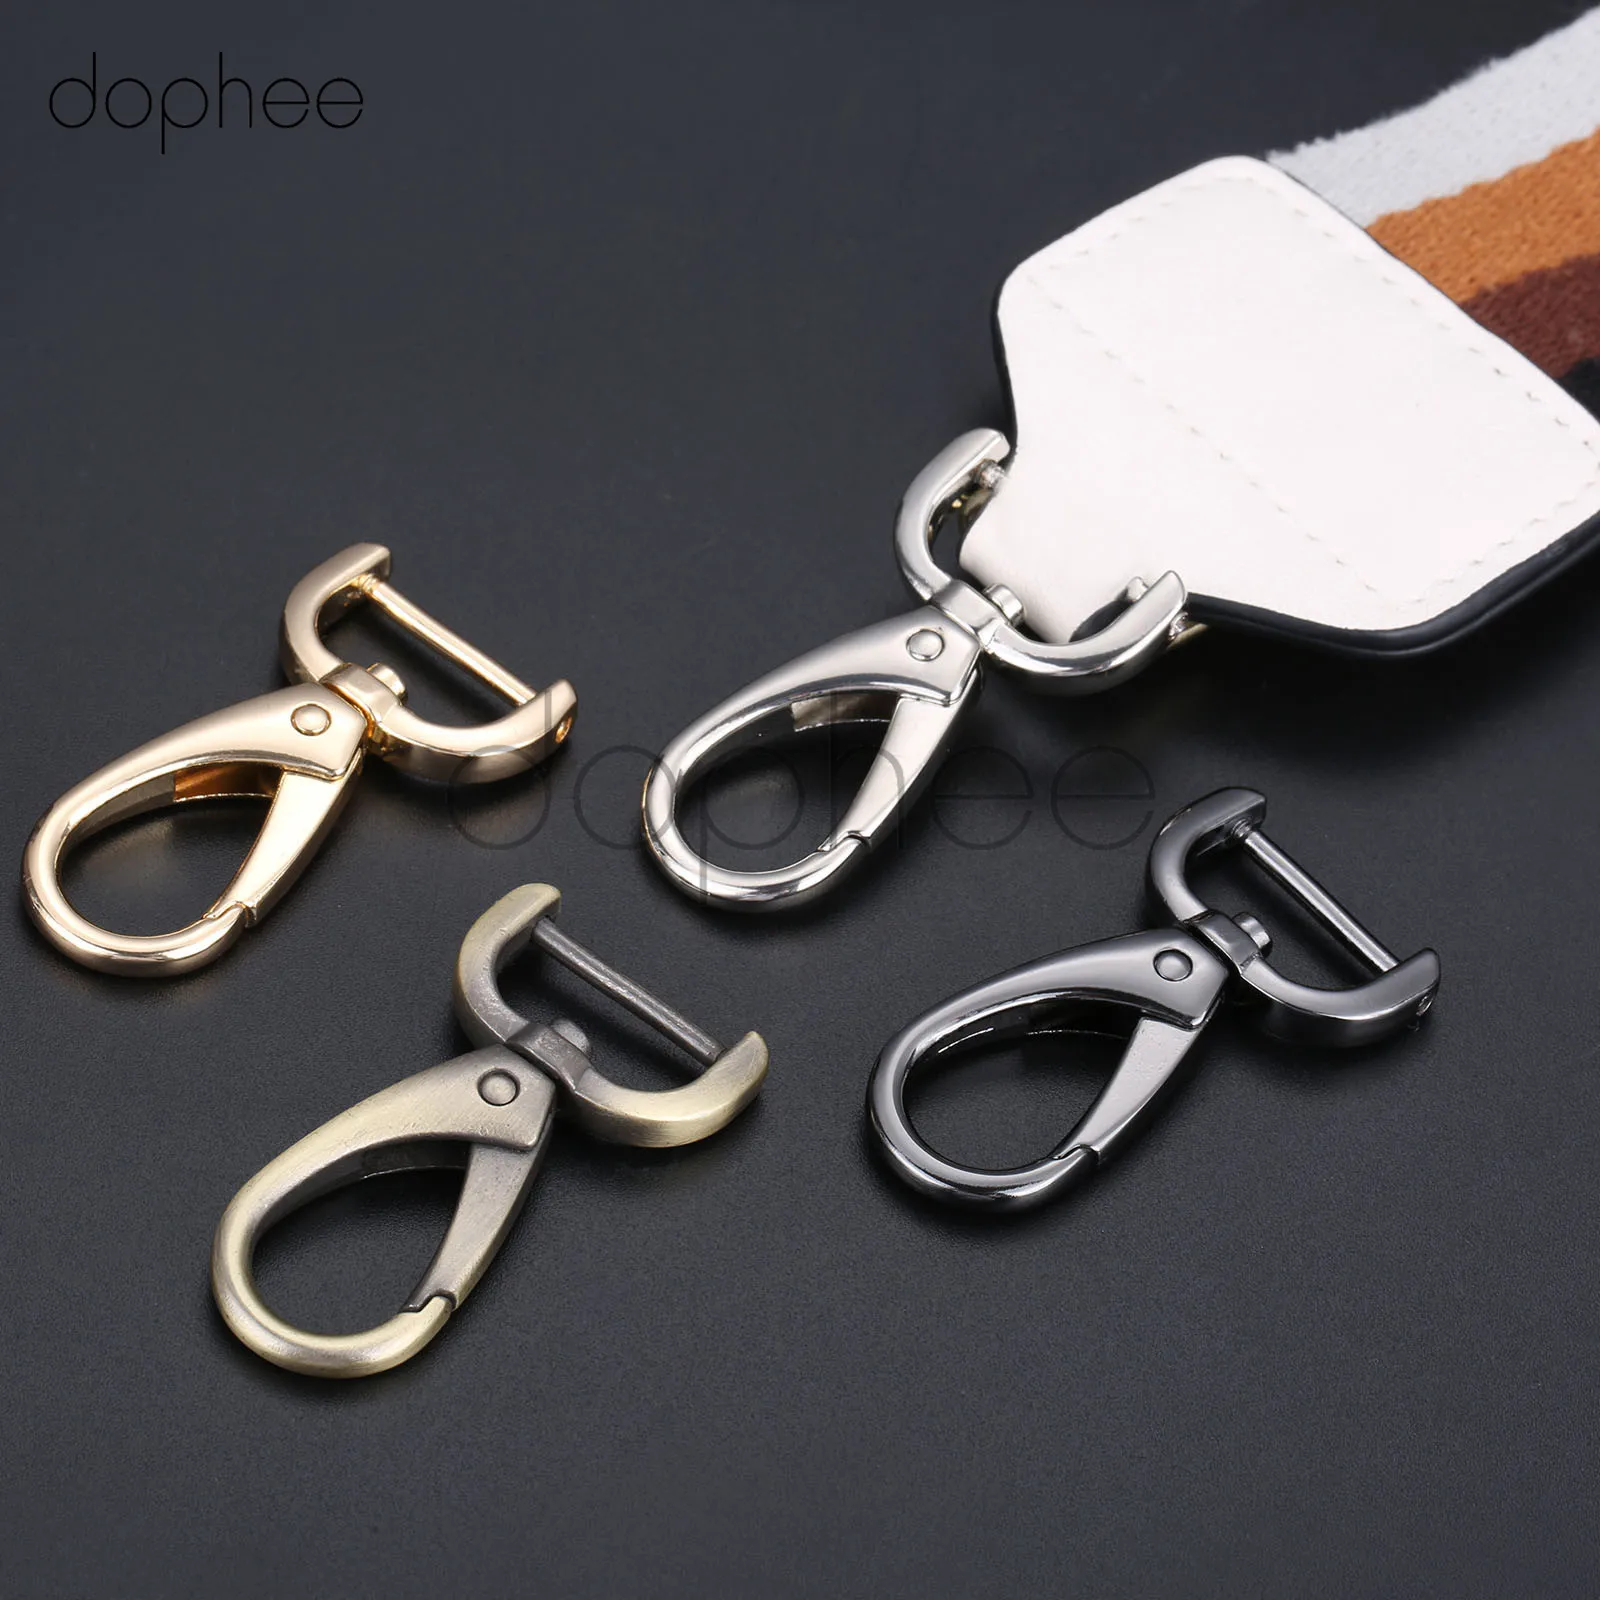 

dophee 4pcs Metal Luggage Bag Dog Buckle Clasps Bags Chain Movable Screw Hooks DIY Sewing Key Accessories